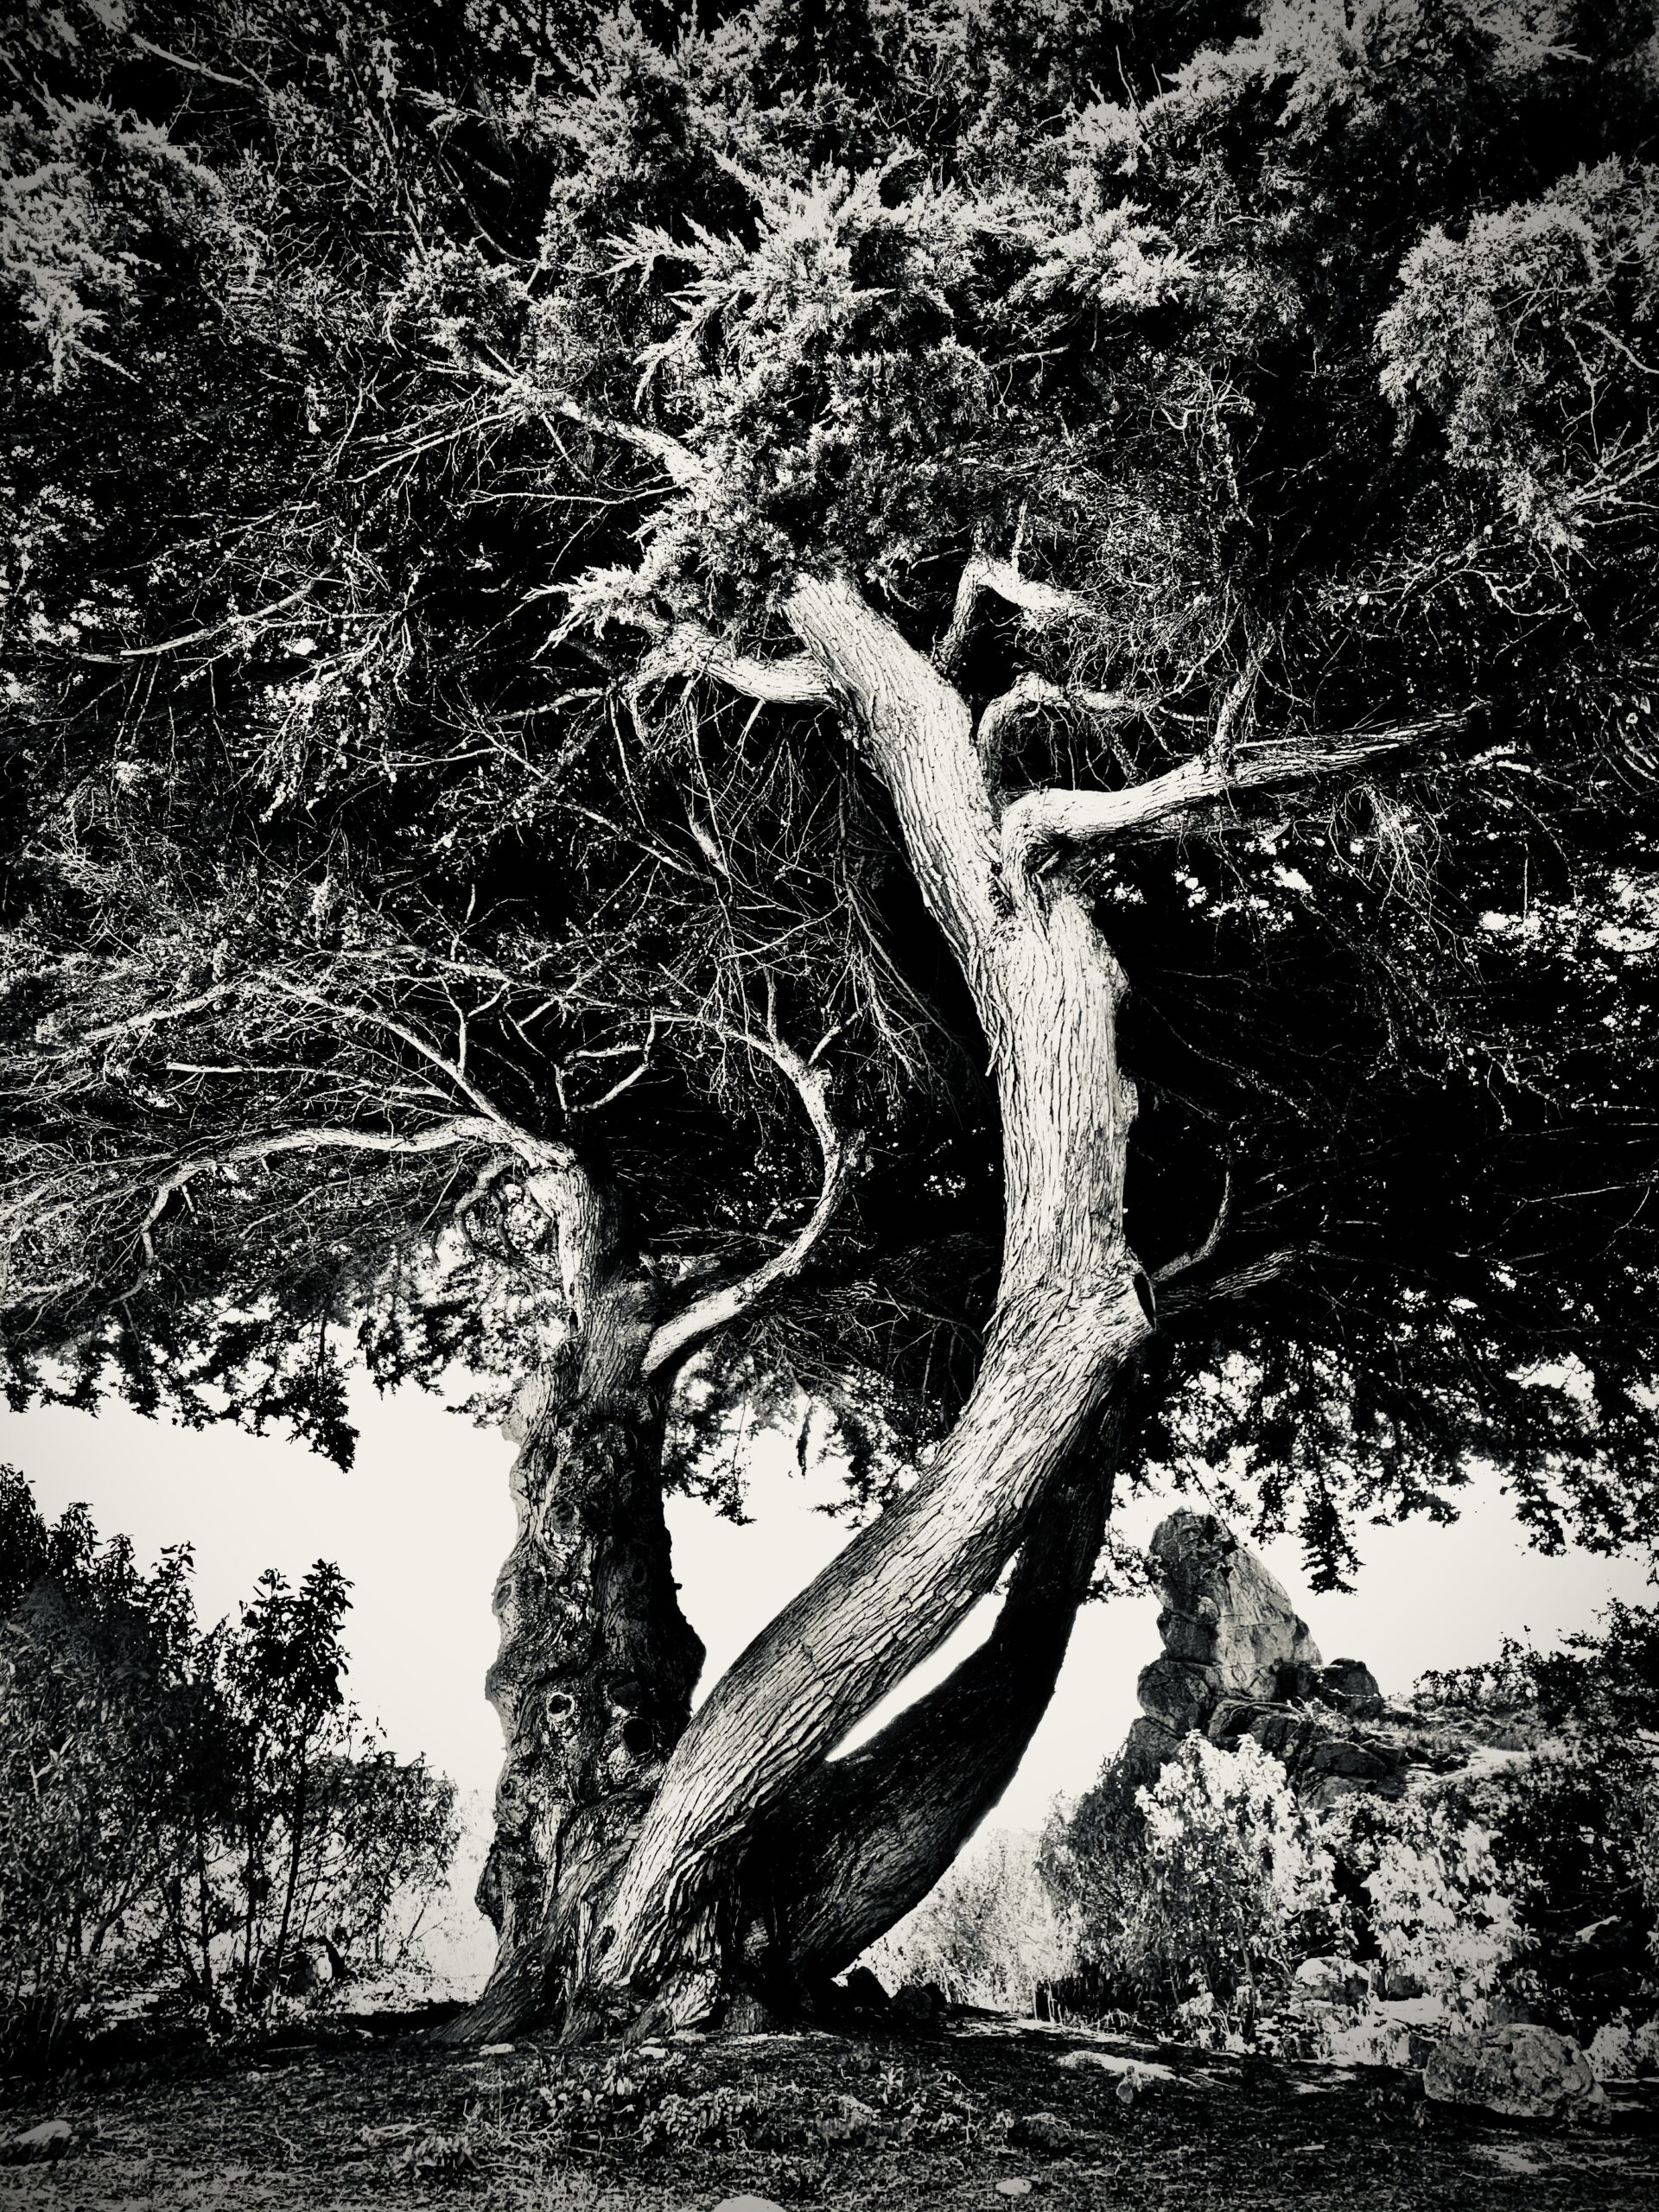 A black and white photograph of a tree.